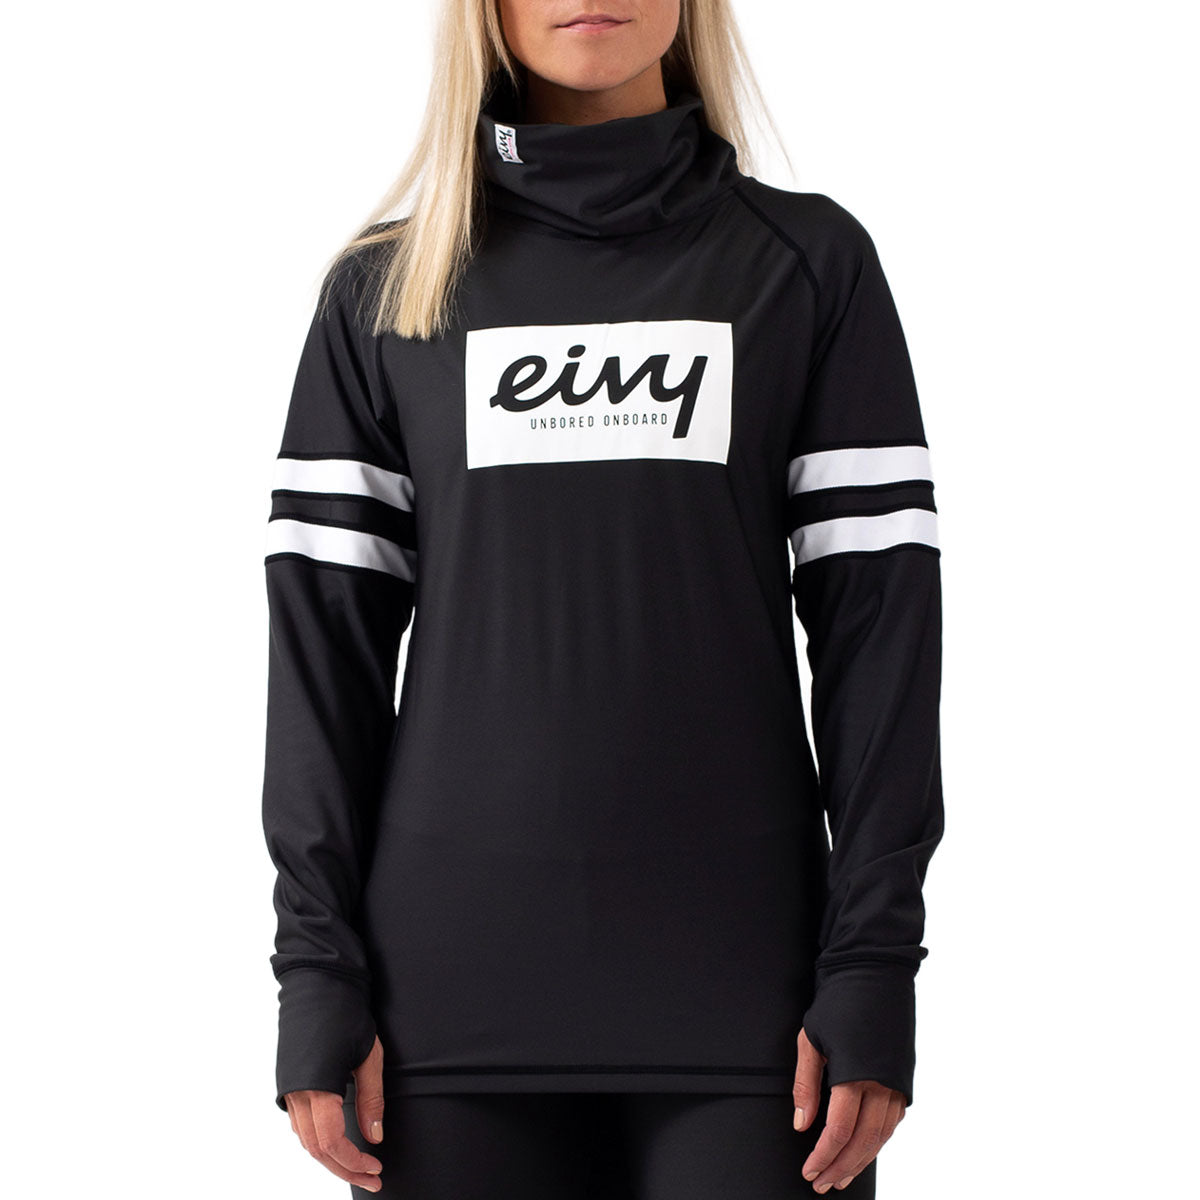 Eivy Icecold Top Snowboard Base Layer - Team Black image 1